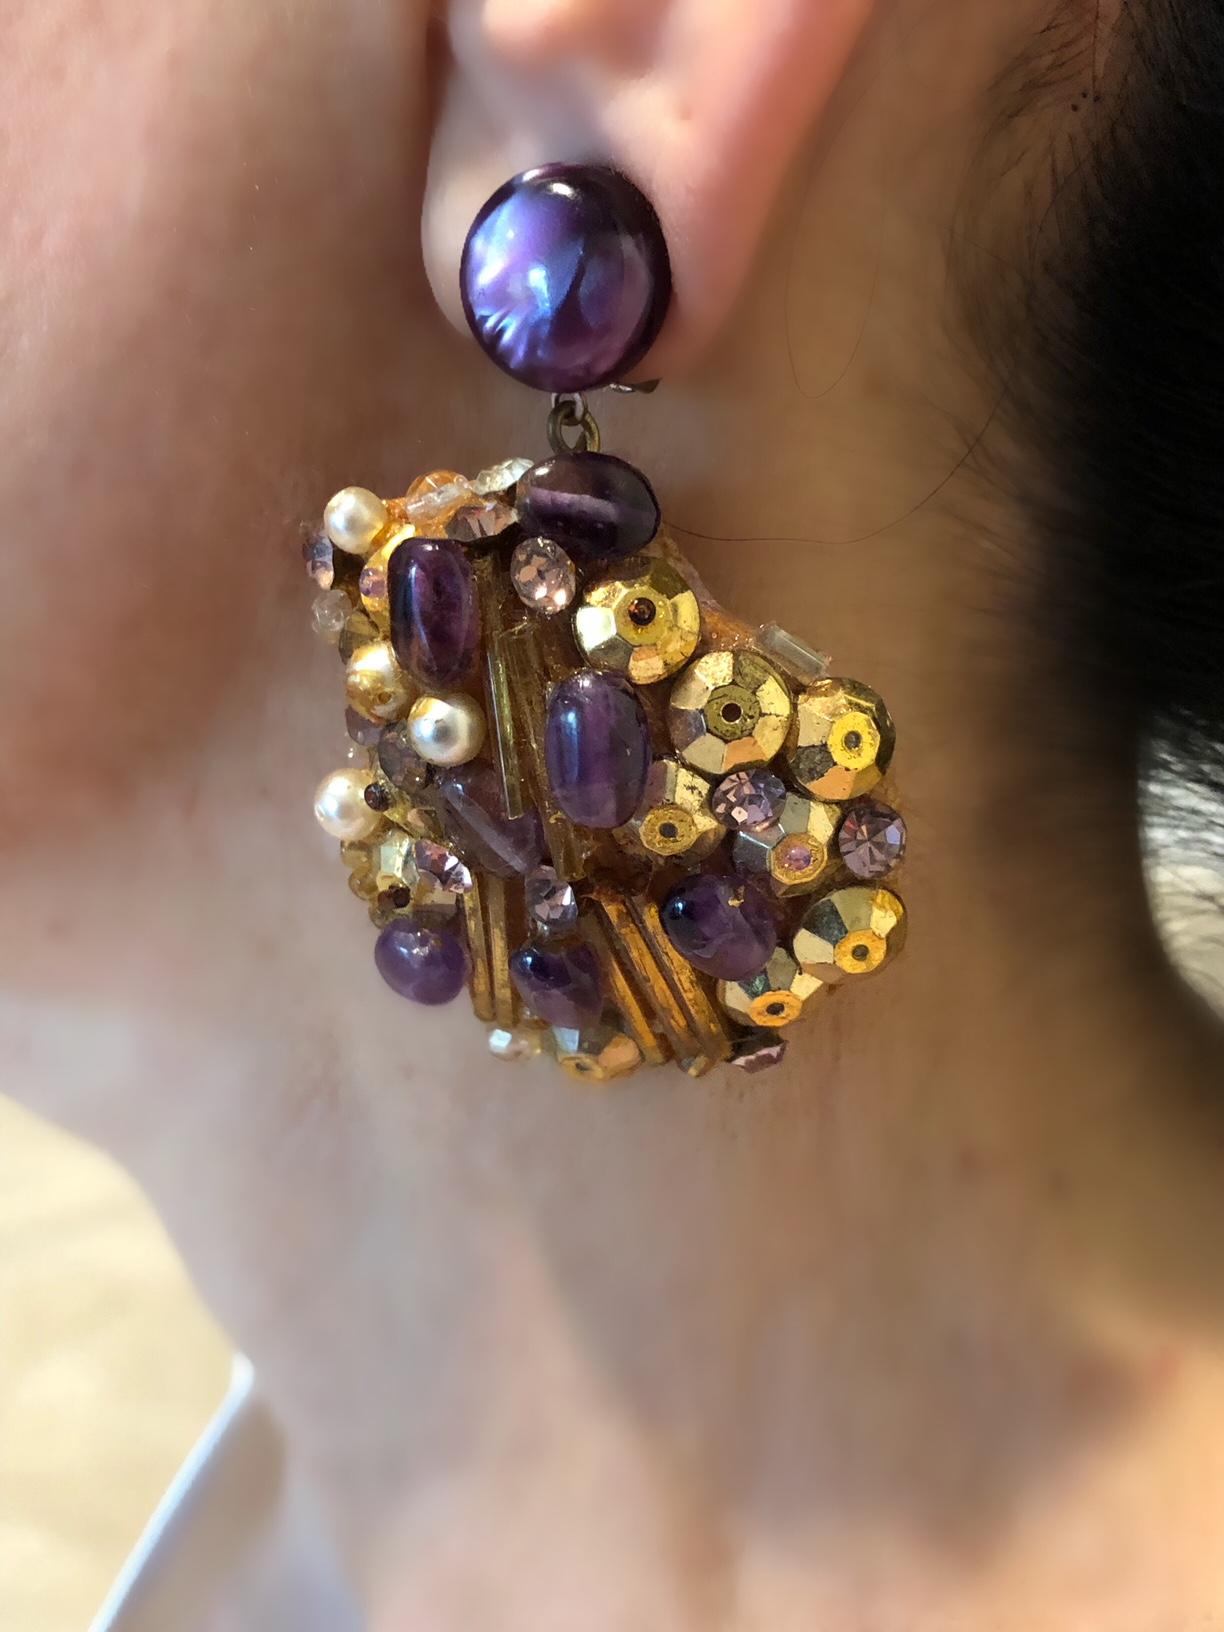 Exquisite handcrafted Italian dimensional statement clip-on earrings. The earrings are comprised of natural sea shells which are covered and adorned with white pearls, gold sequins, long glass bugle beads and accented by purple glass beads. These